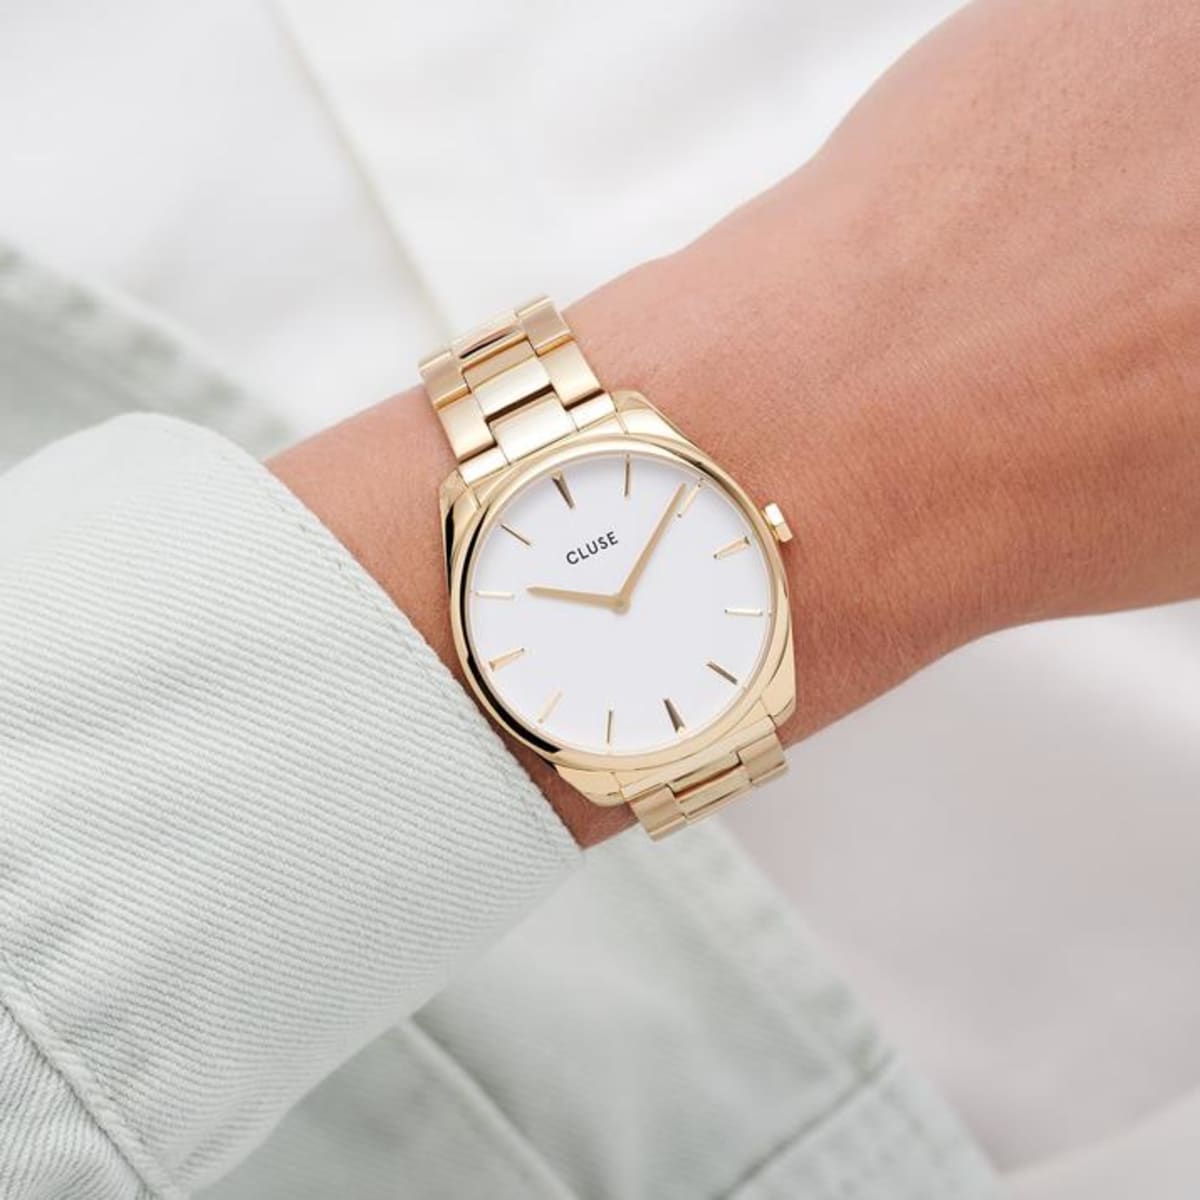 Product Description If you like to blur the lines between minimalism and glamour, this CLUSE Féroce watch offers you the best of both worlds. It's a true classic. An ode to our love for minimalism and joie de vivre. Its 36 mm case is refined but pronounced: a perfect companion for the mid-sized wrist. The matte white dial blends perfectly with its gold coloured case and link bracelet. You can easily interchange the strap of this Féroce model with any 18 mm CLUSE watch strap.